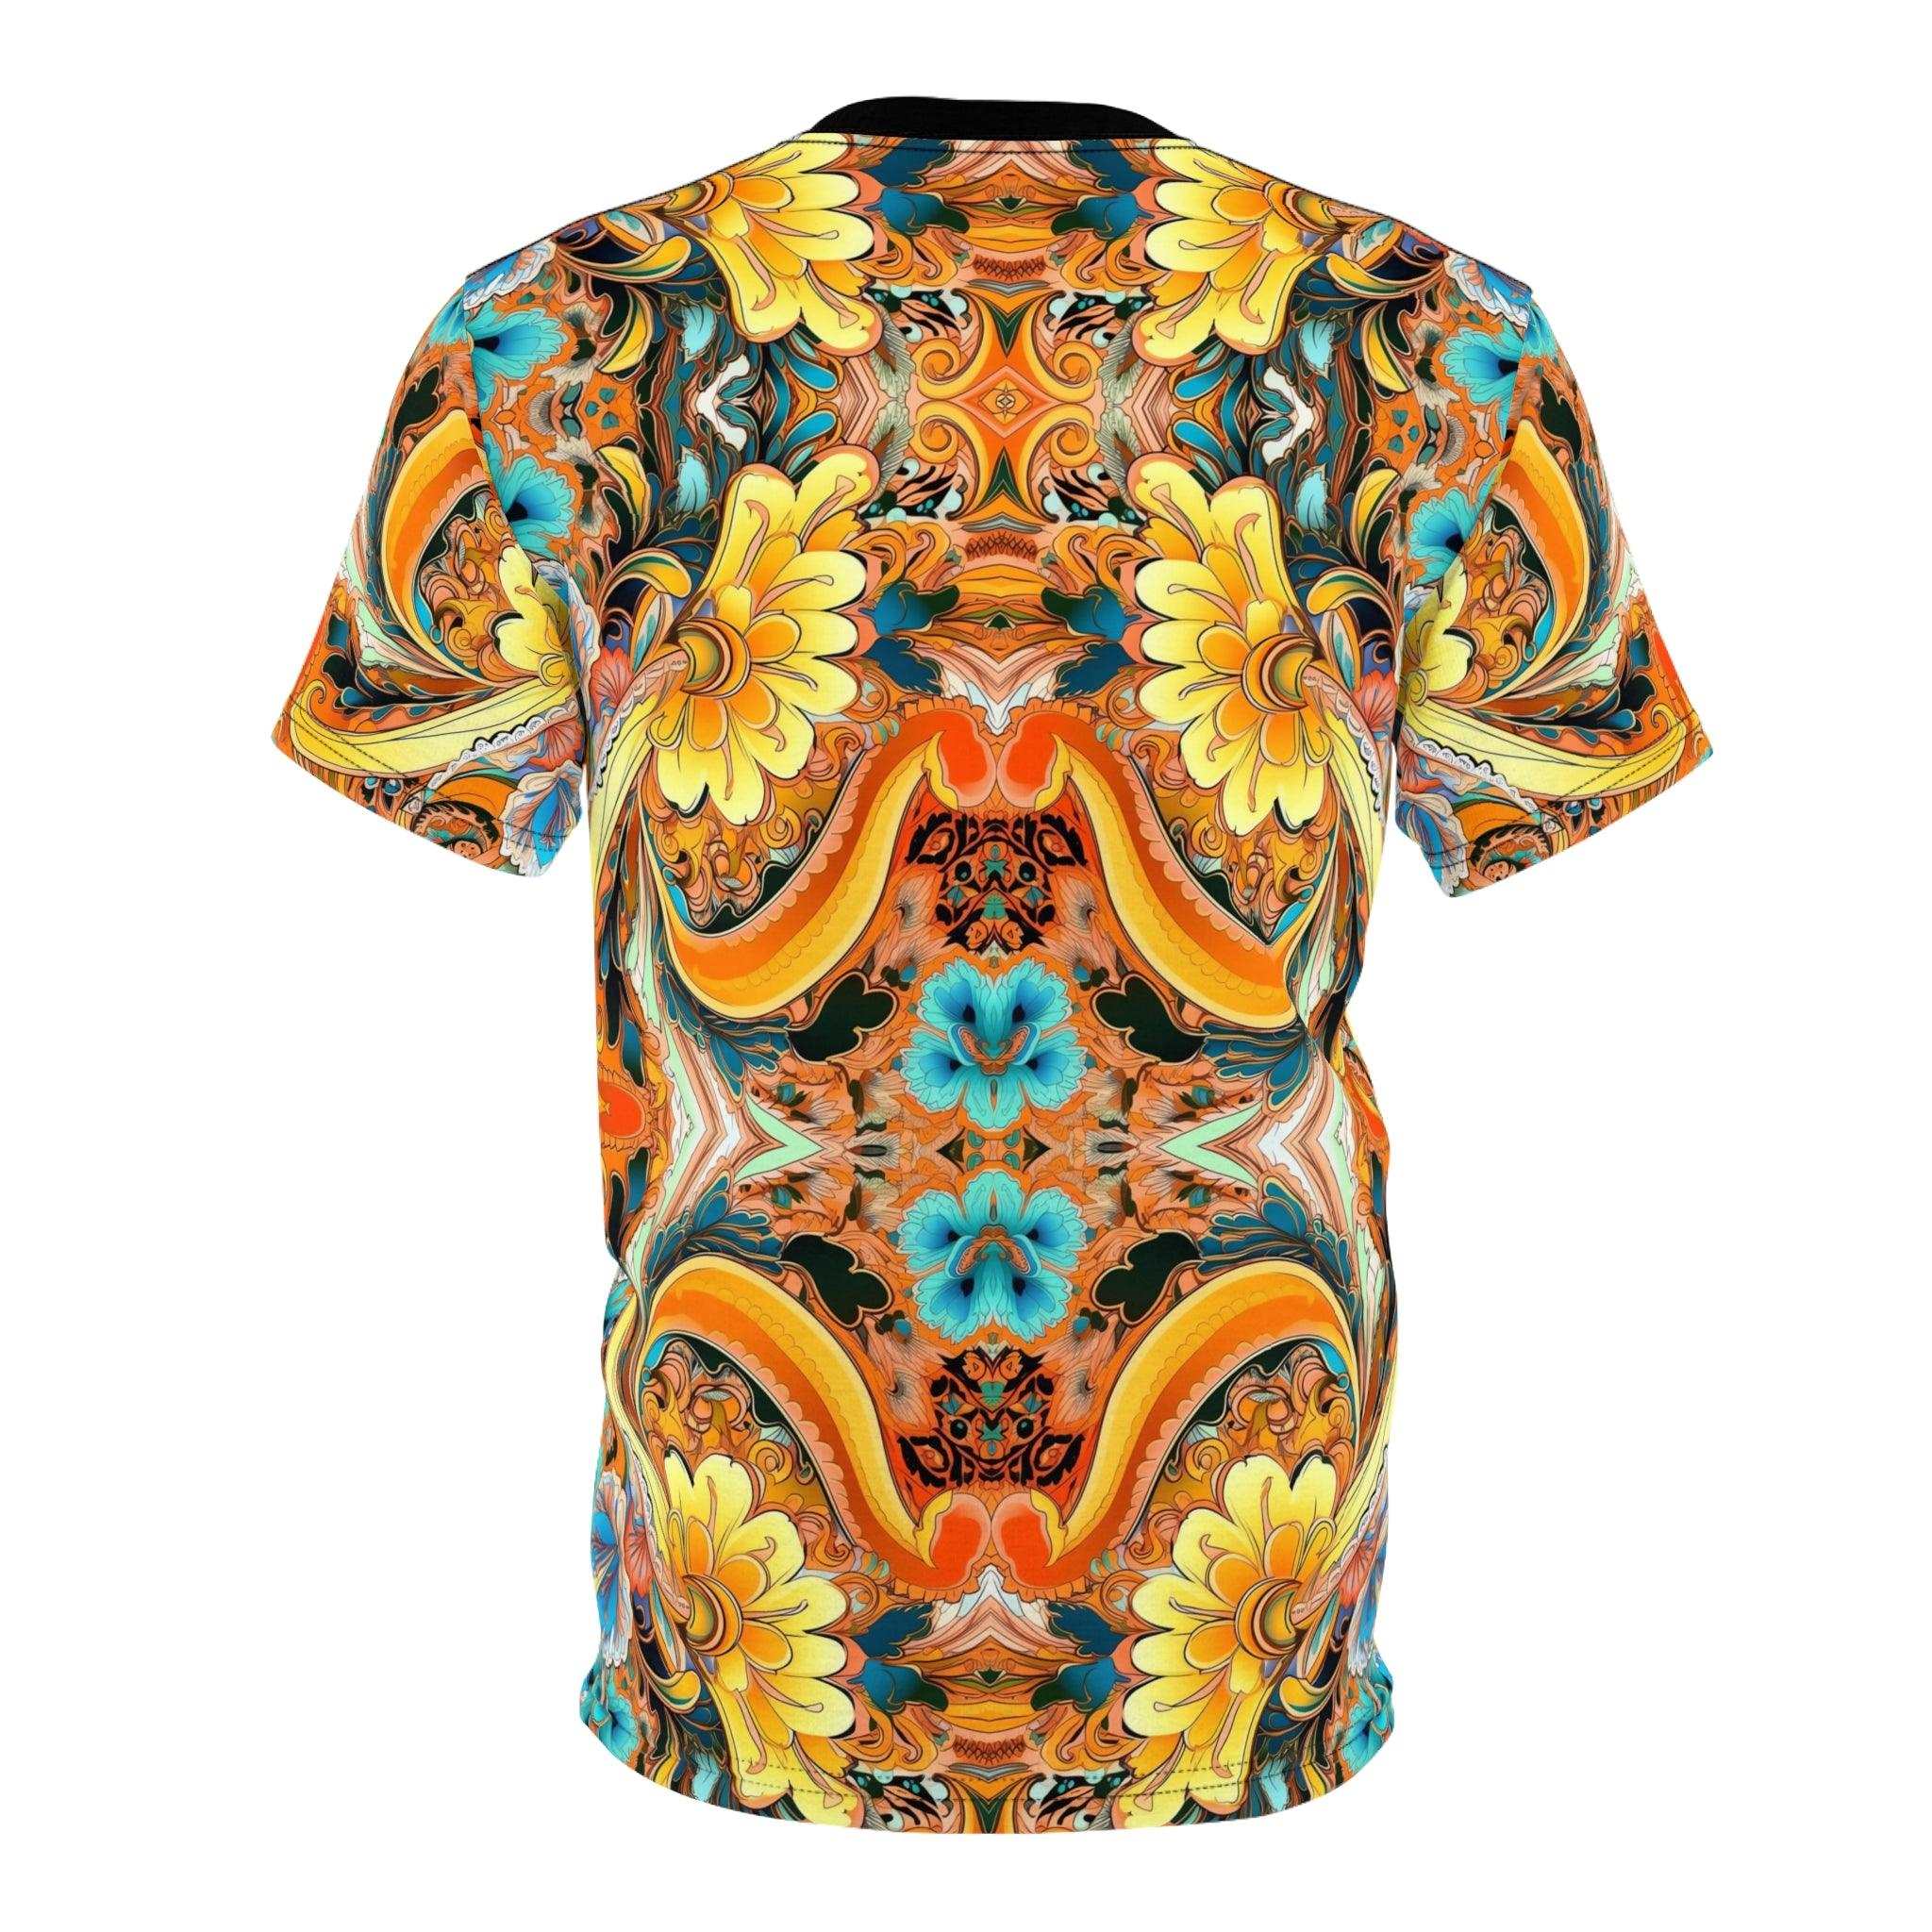 Boho Paisley Floral Abstract Colorful Graphic T-Shirt - ELIVIOR